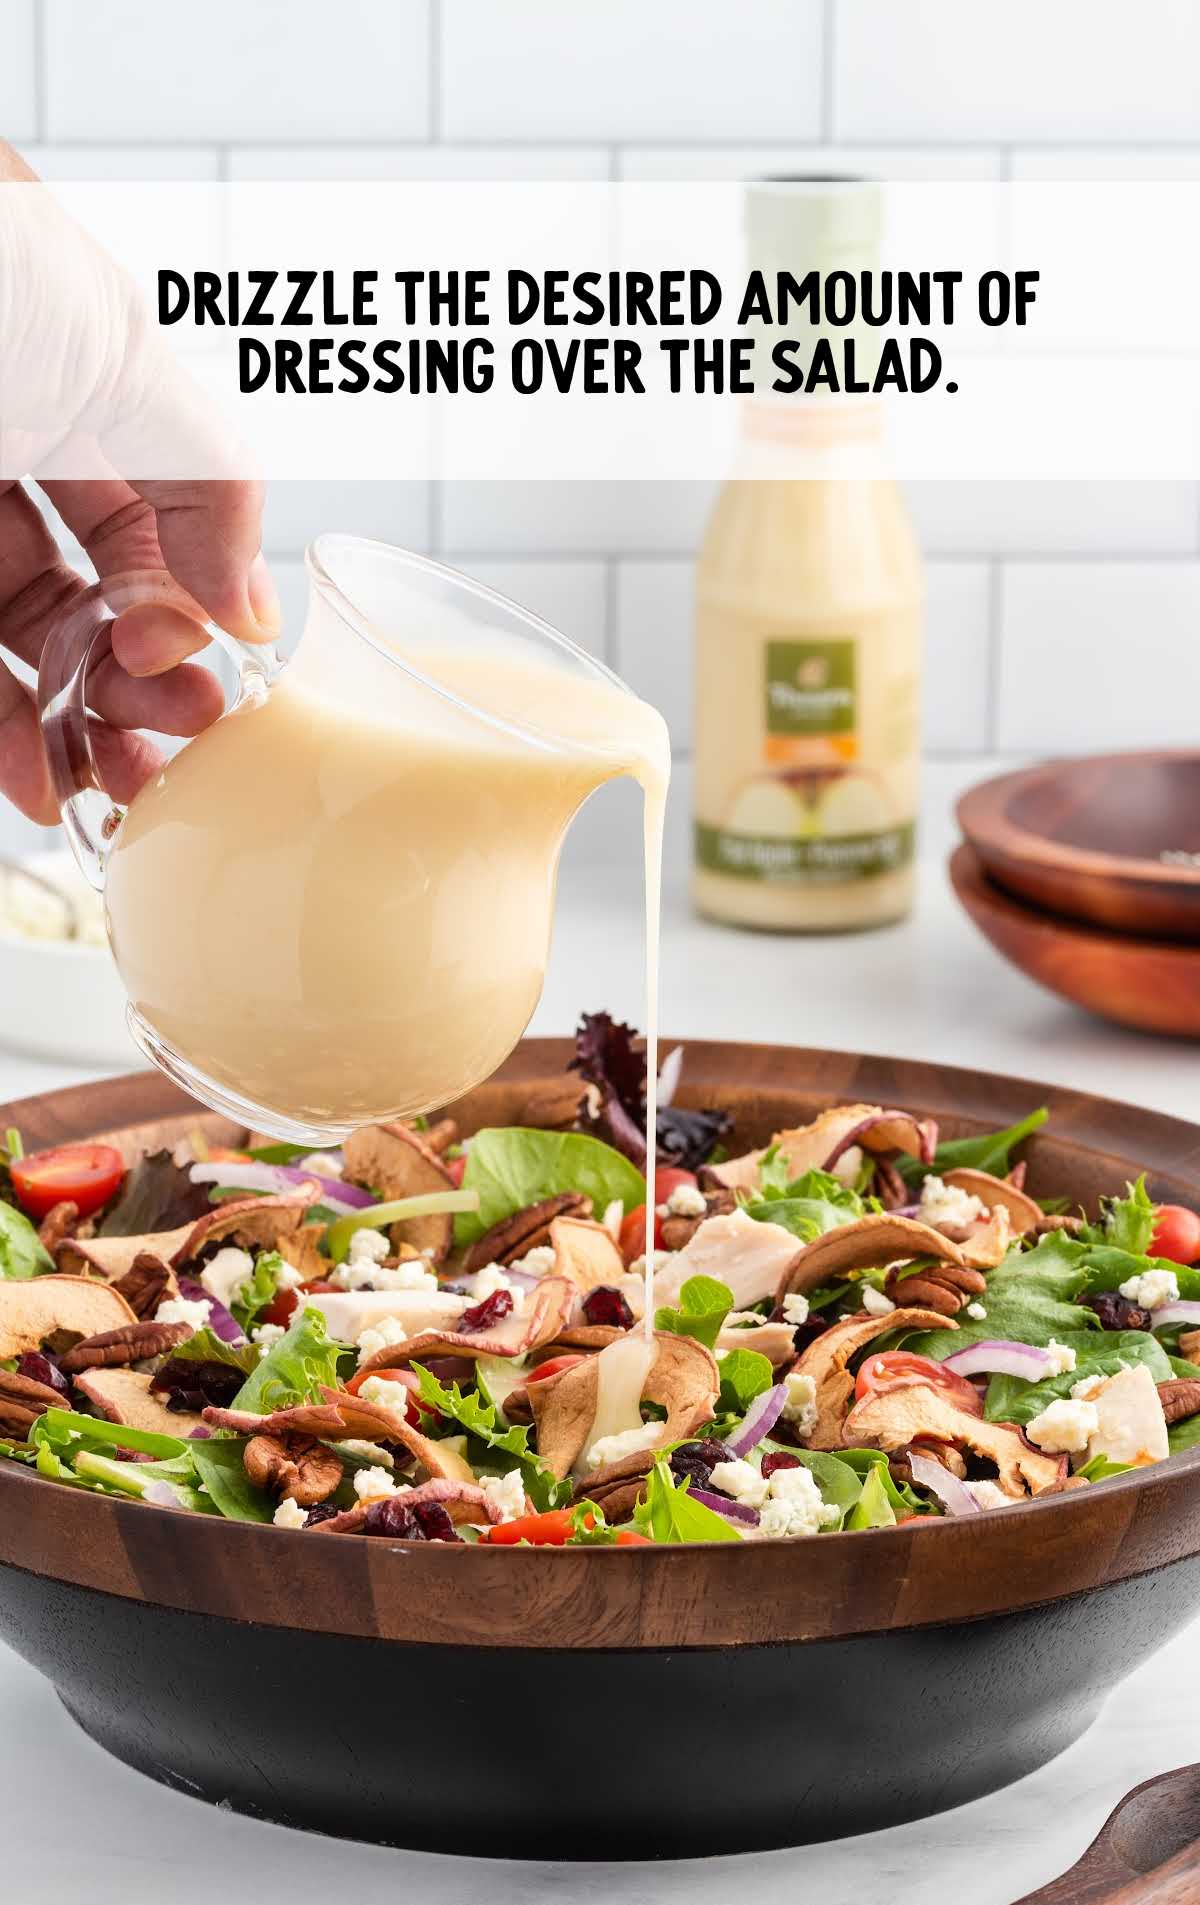 dressing drizzled over the salad